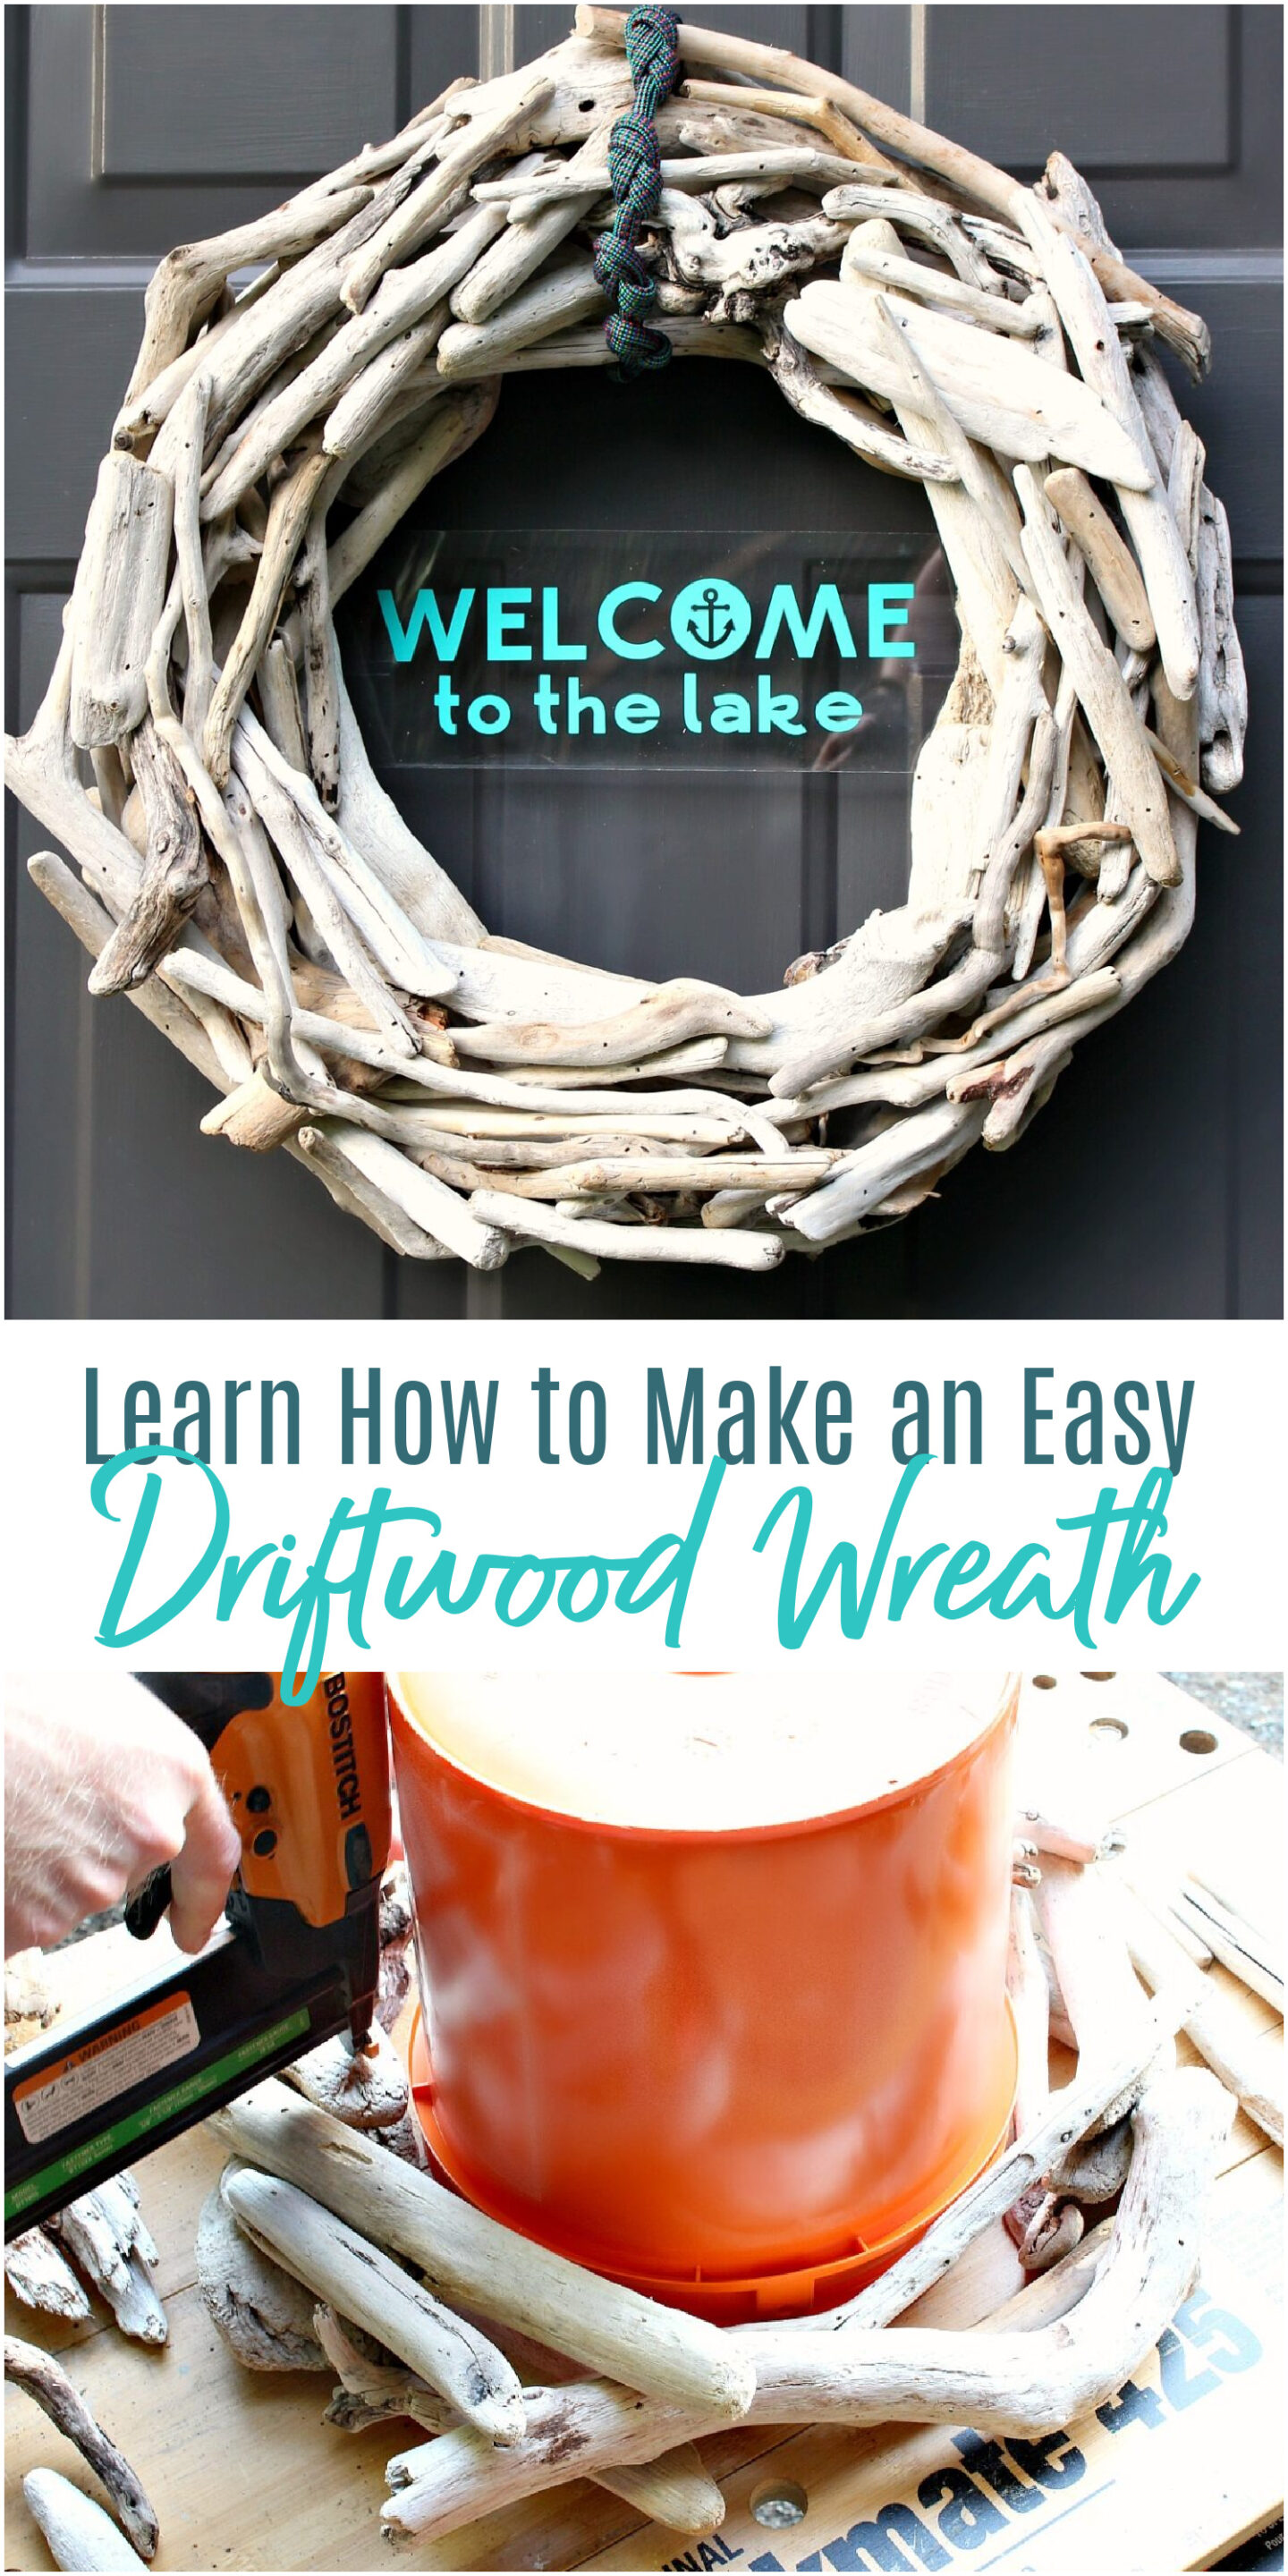 How to Make a Driftwood Wreath